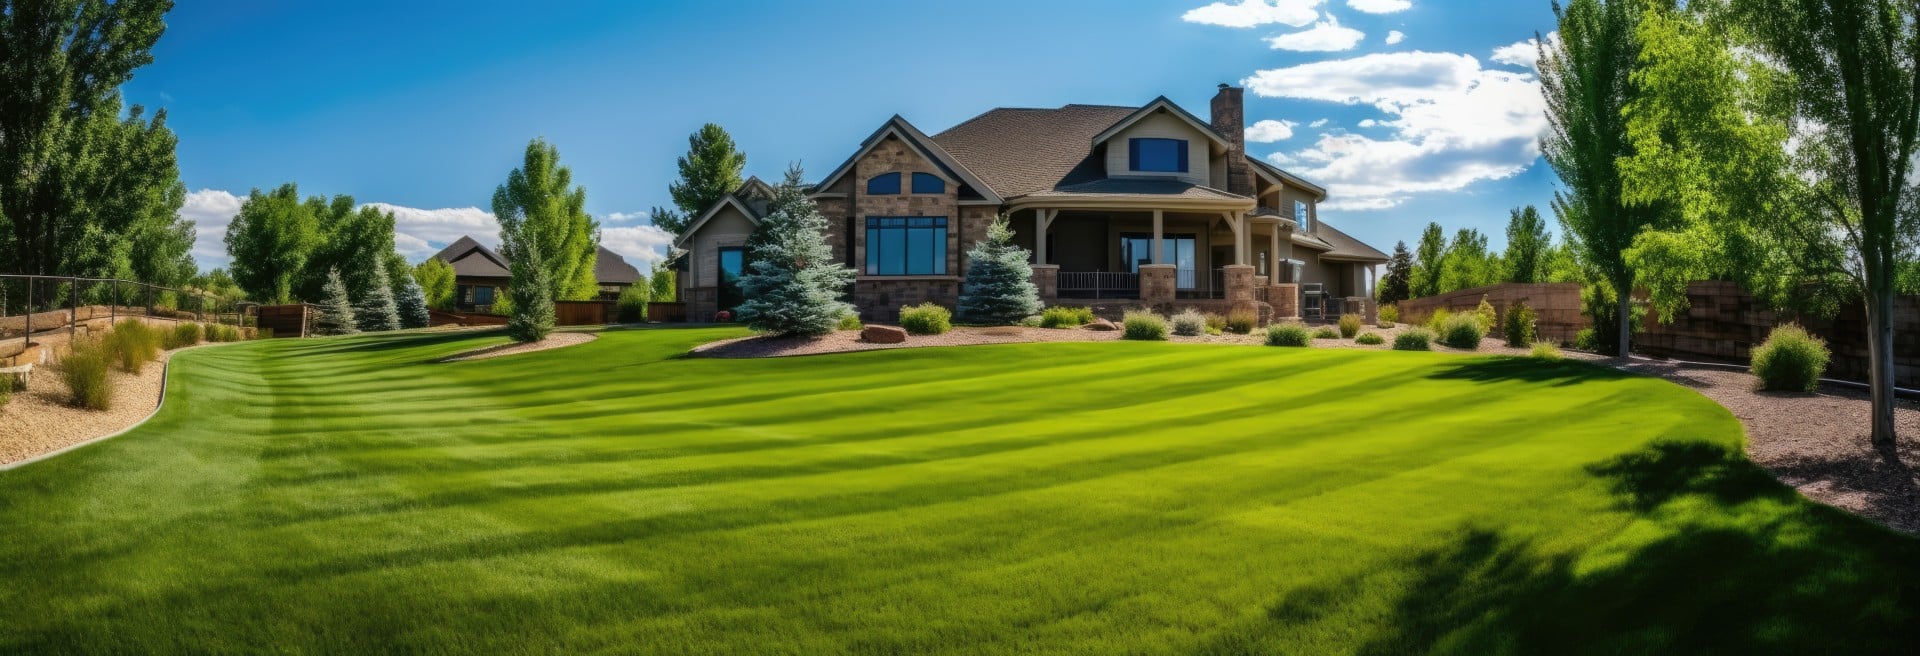 lawn maintenance landscaping care specialists